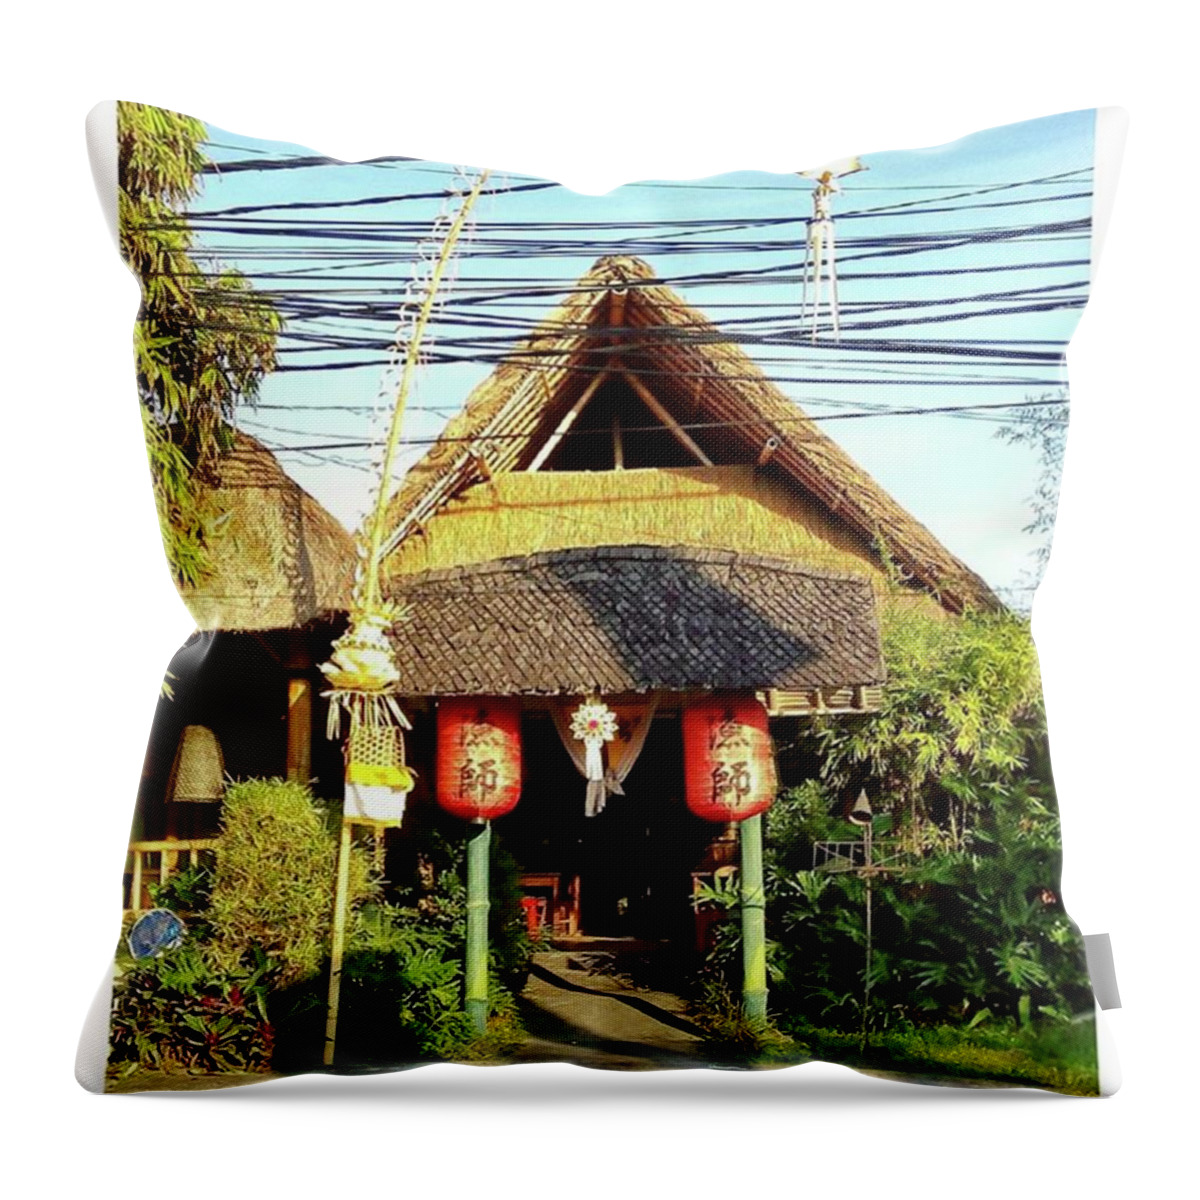 Sanurbali Throw Pillow featuring the photograph Come To Me Those Who Are #hungry by Loly Lucious